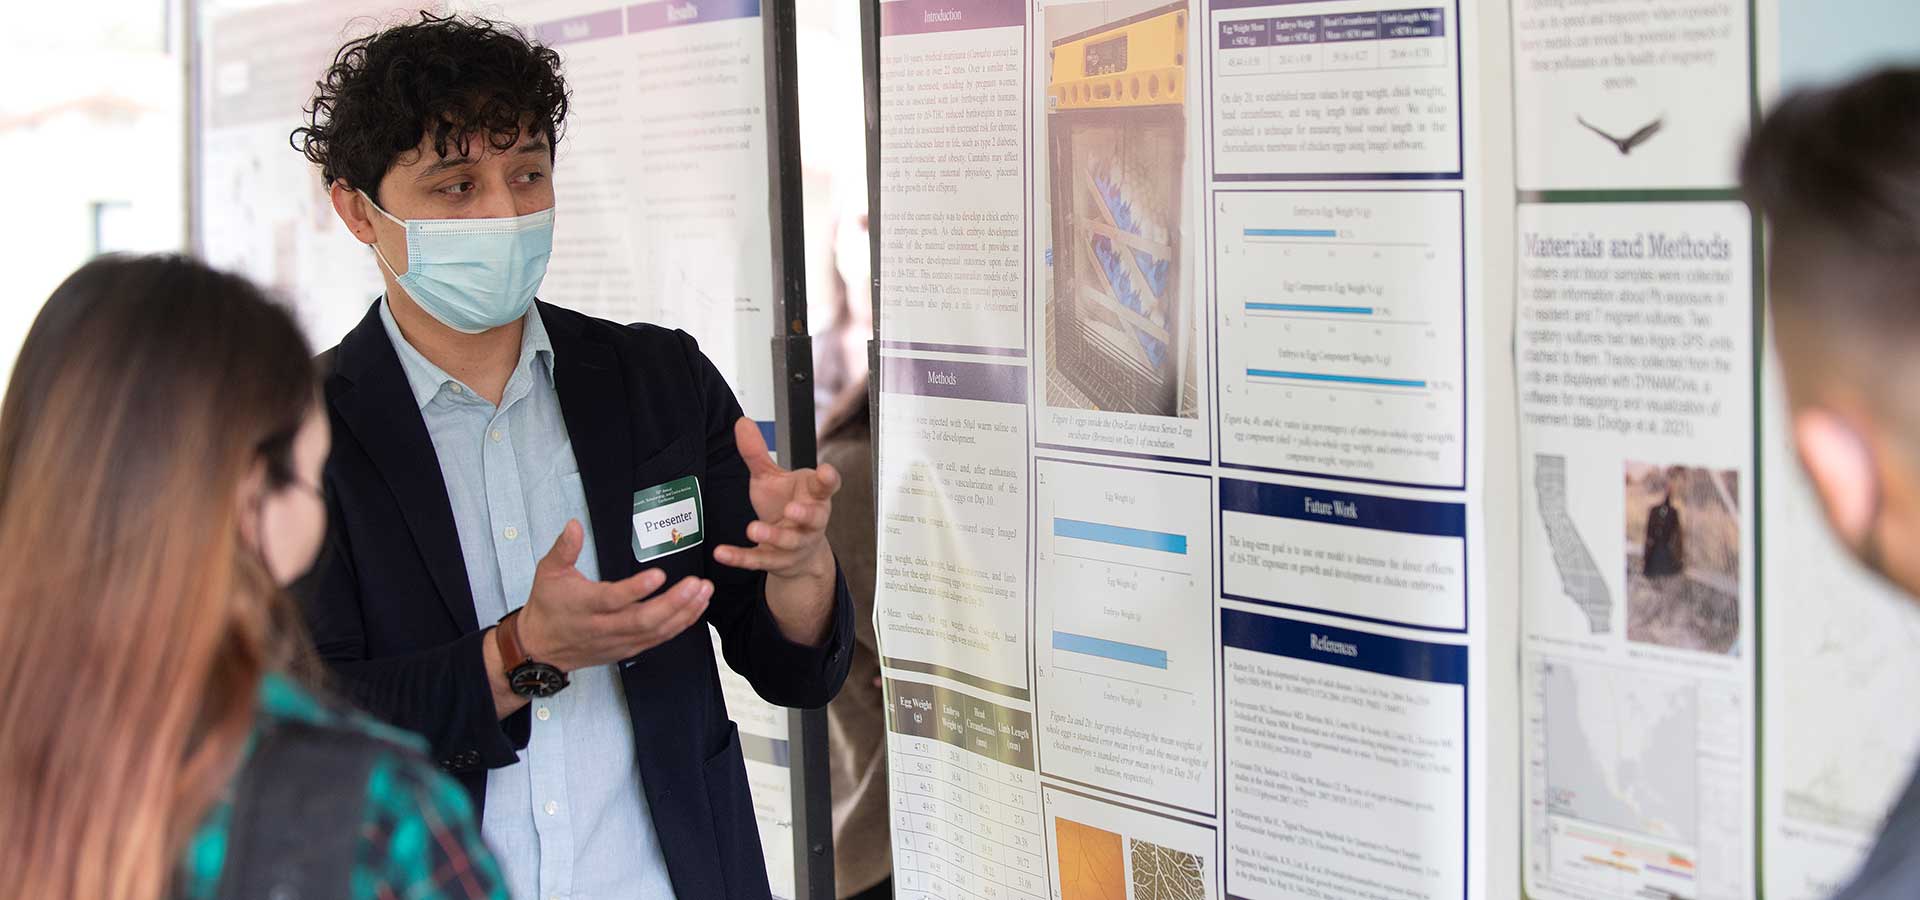 Kenneth Paredes at the Student Research poster session.